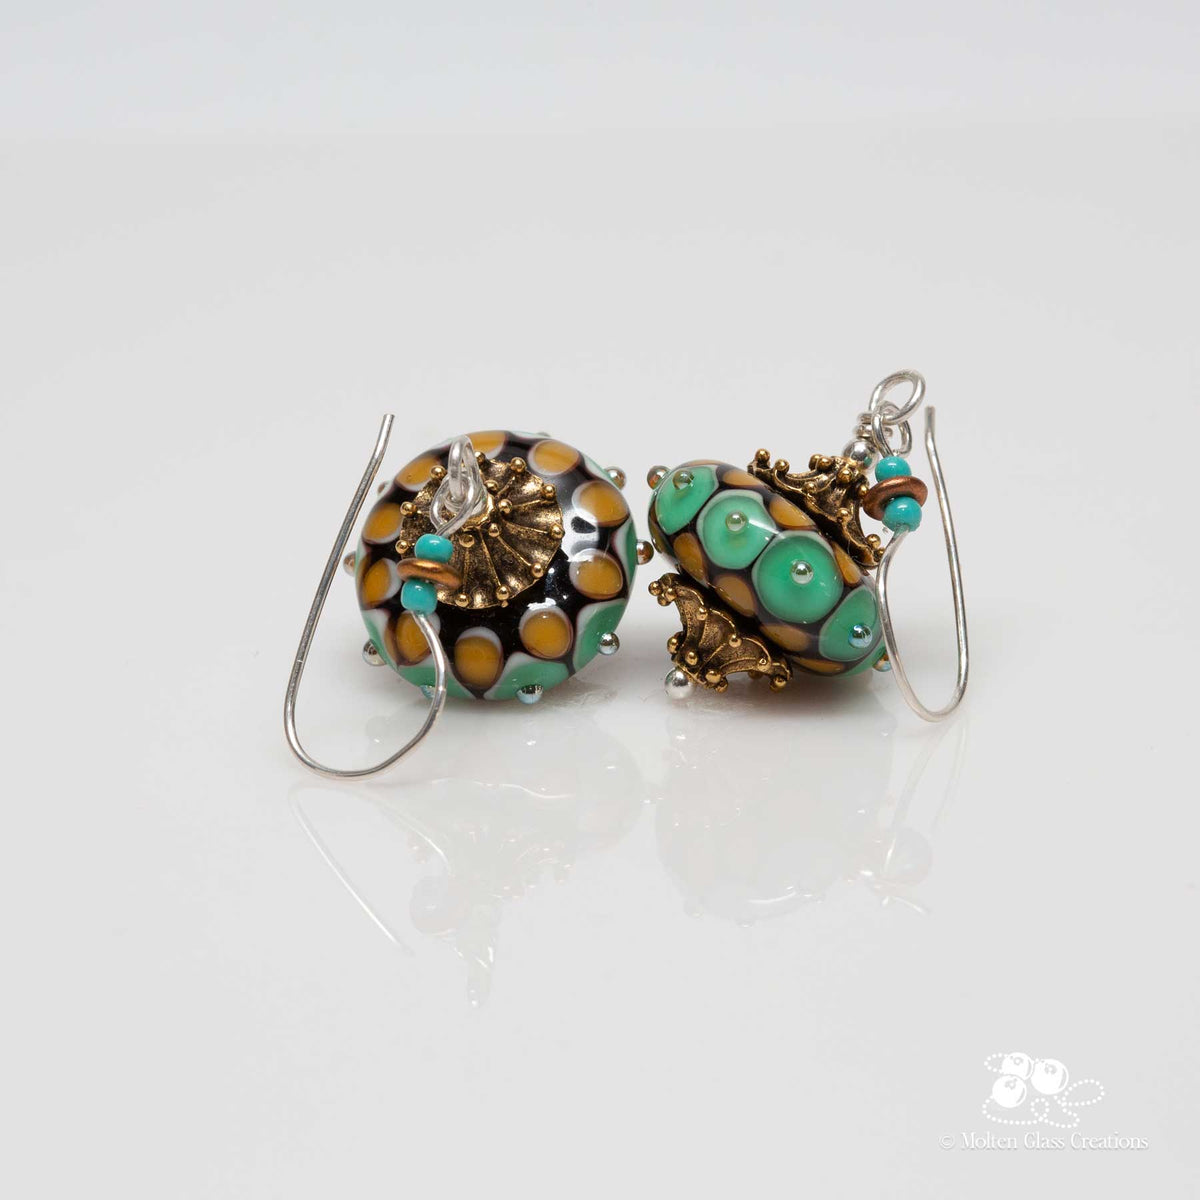 Vintage Teal Delight Earrings - Molten Glass Creations